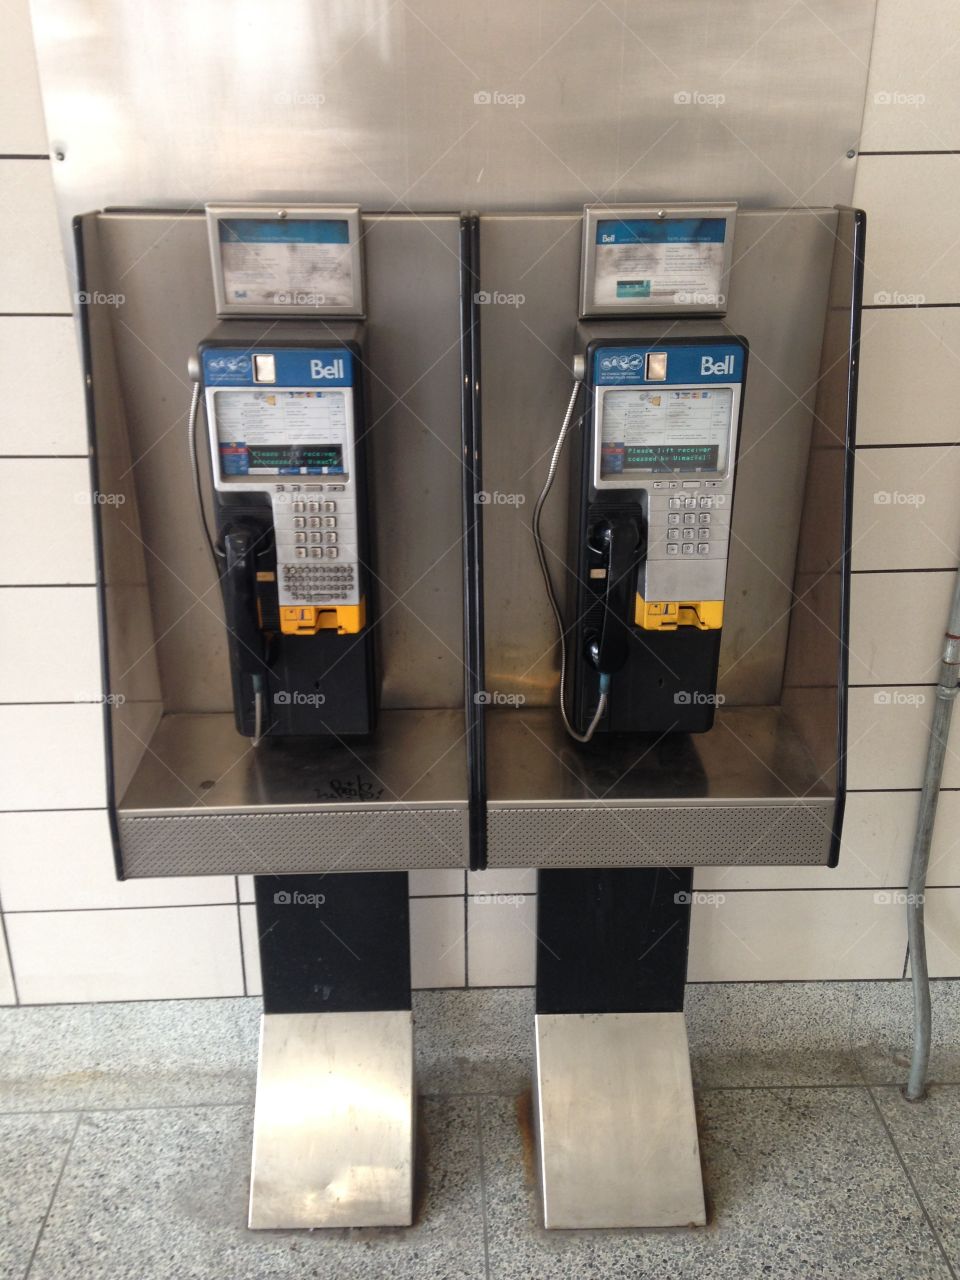 Twin pay phones

Bell Canada